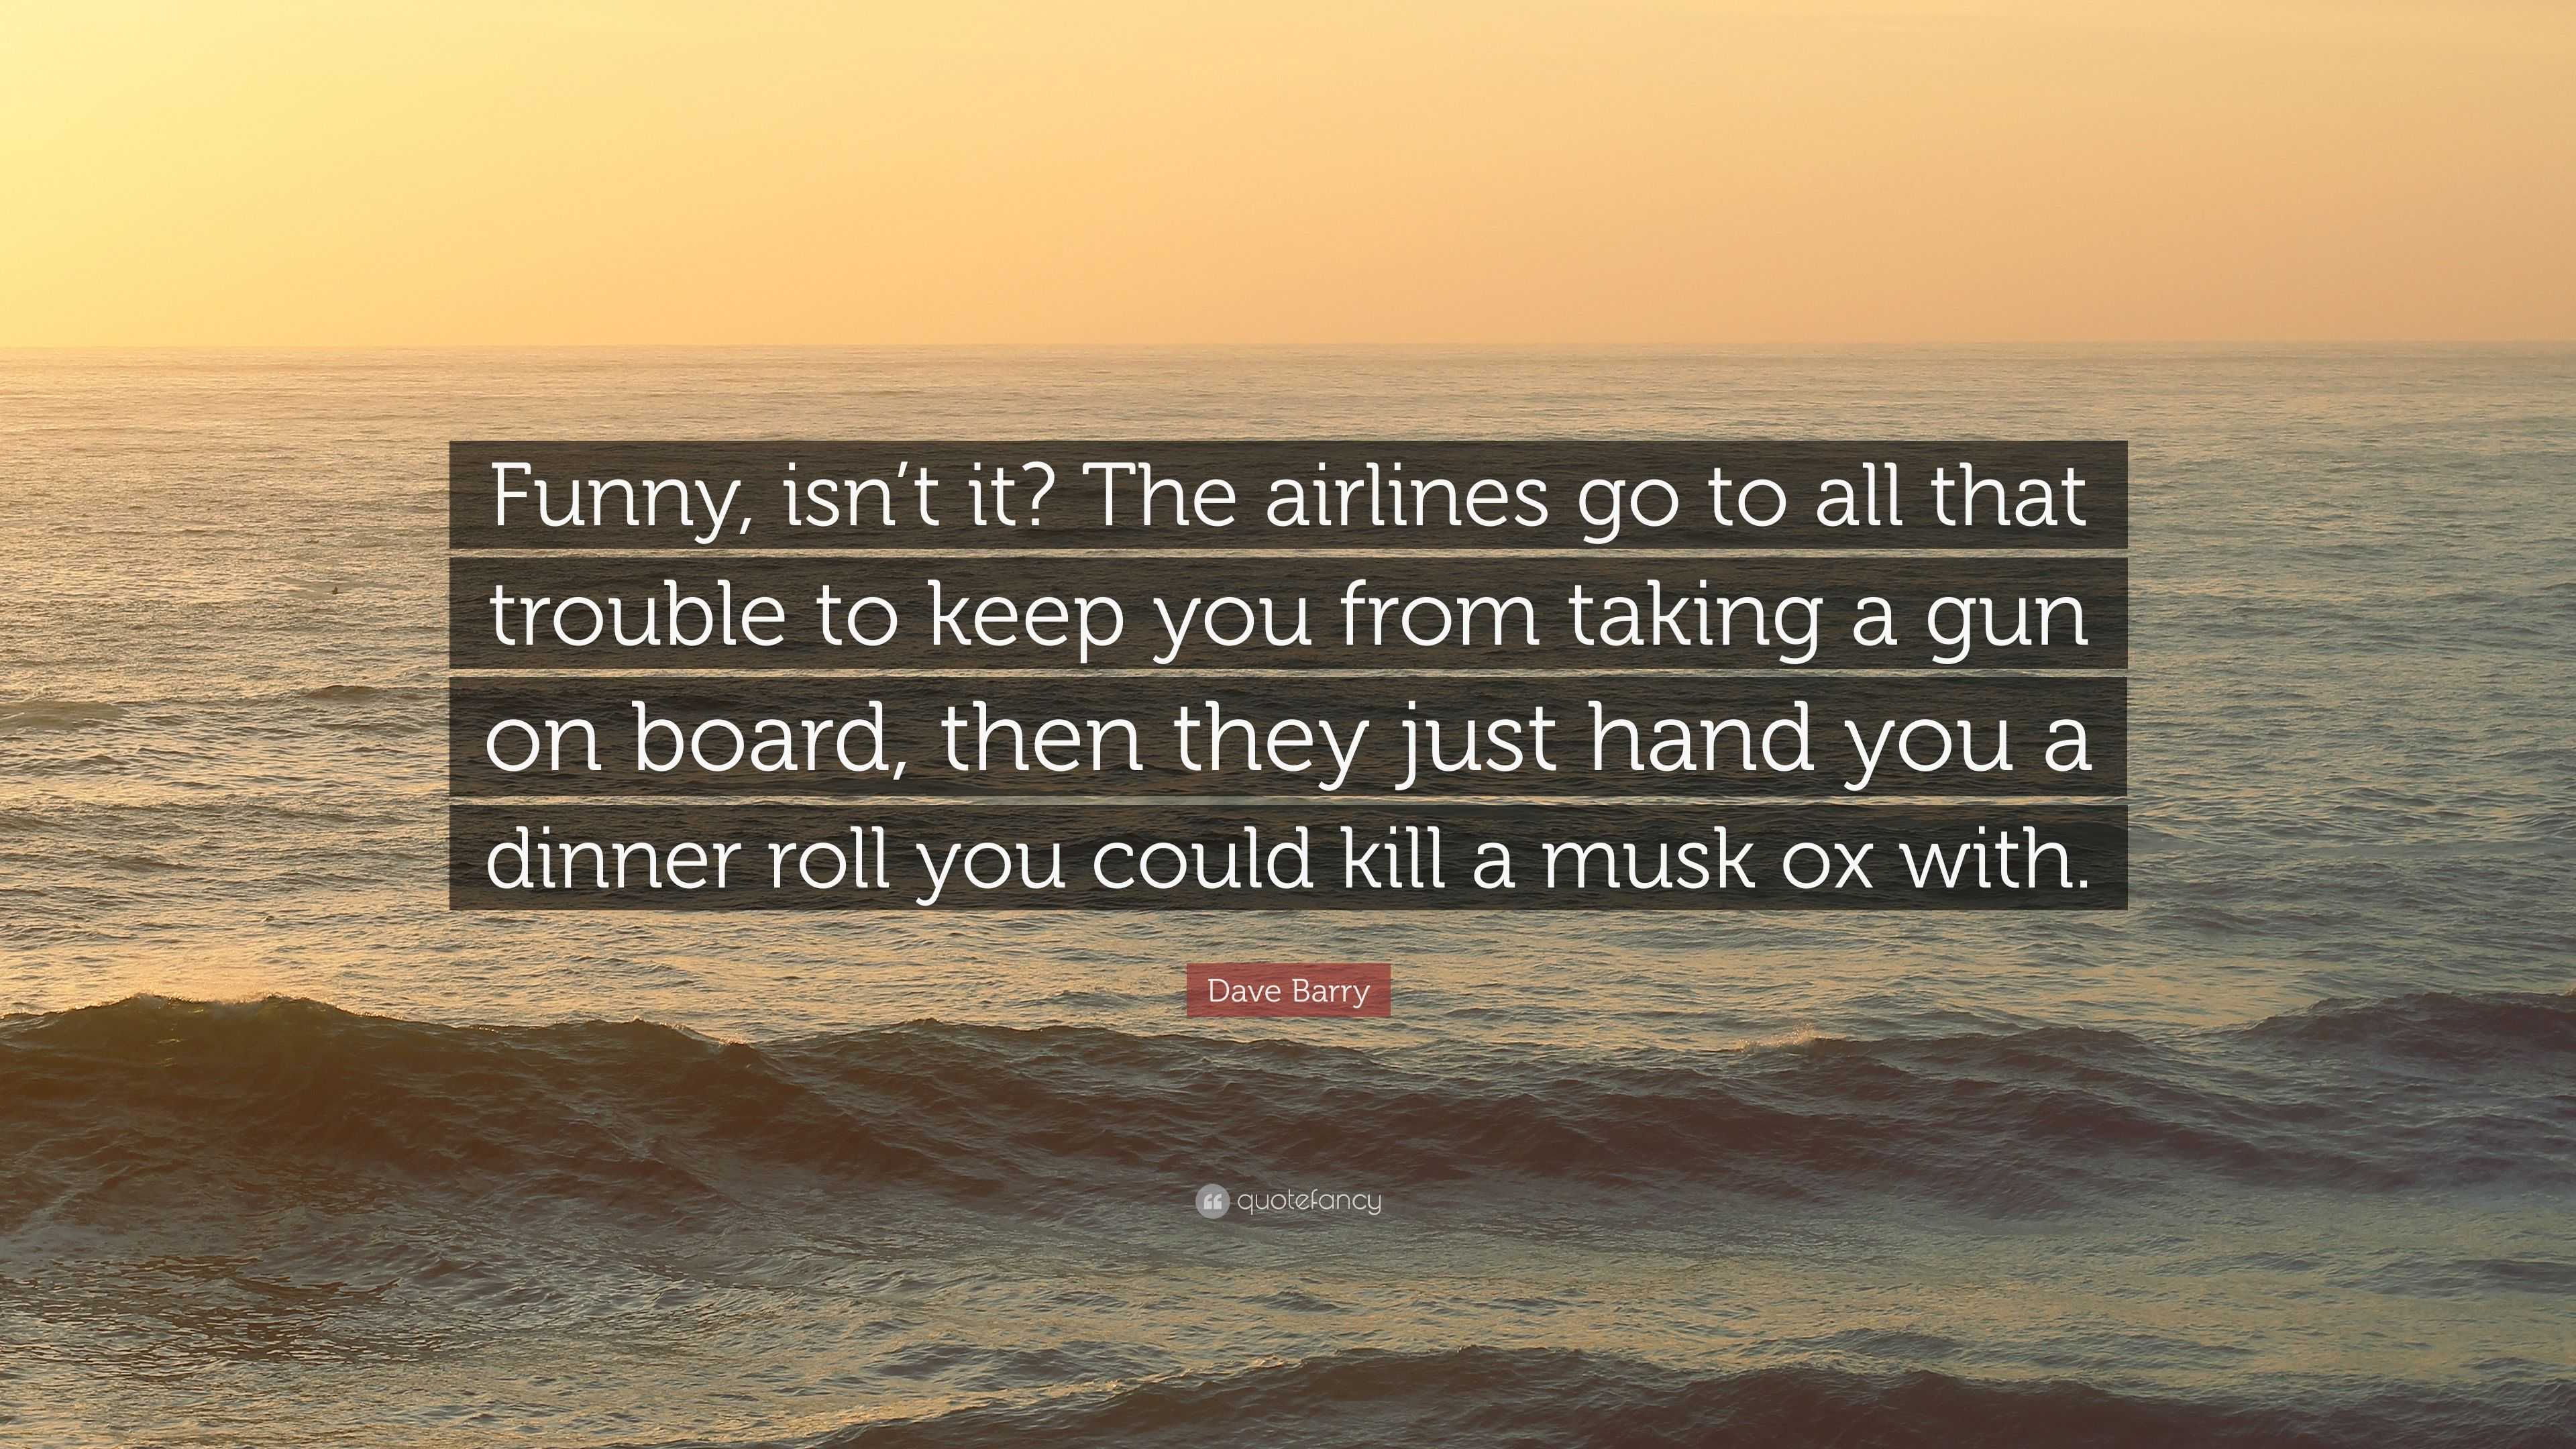 Dave Barry Quote: “Funny, isn't it? The airlines go to all that trouble to  keep you from taking a gun on board, then they just hand you a d...”